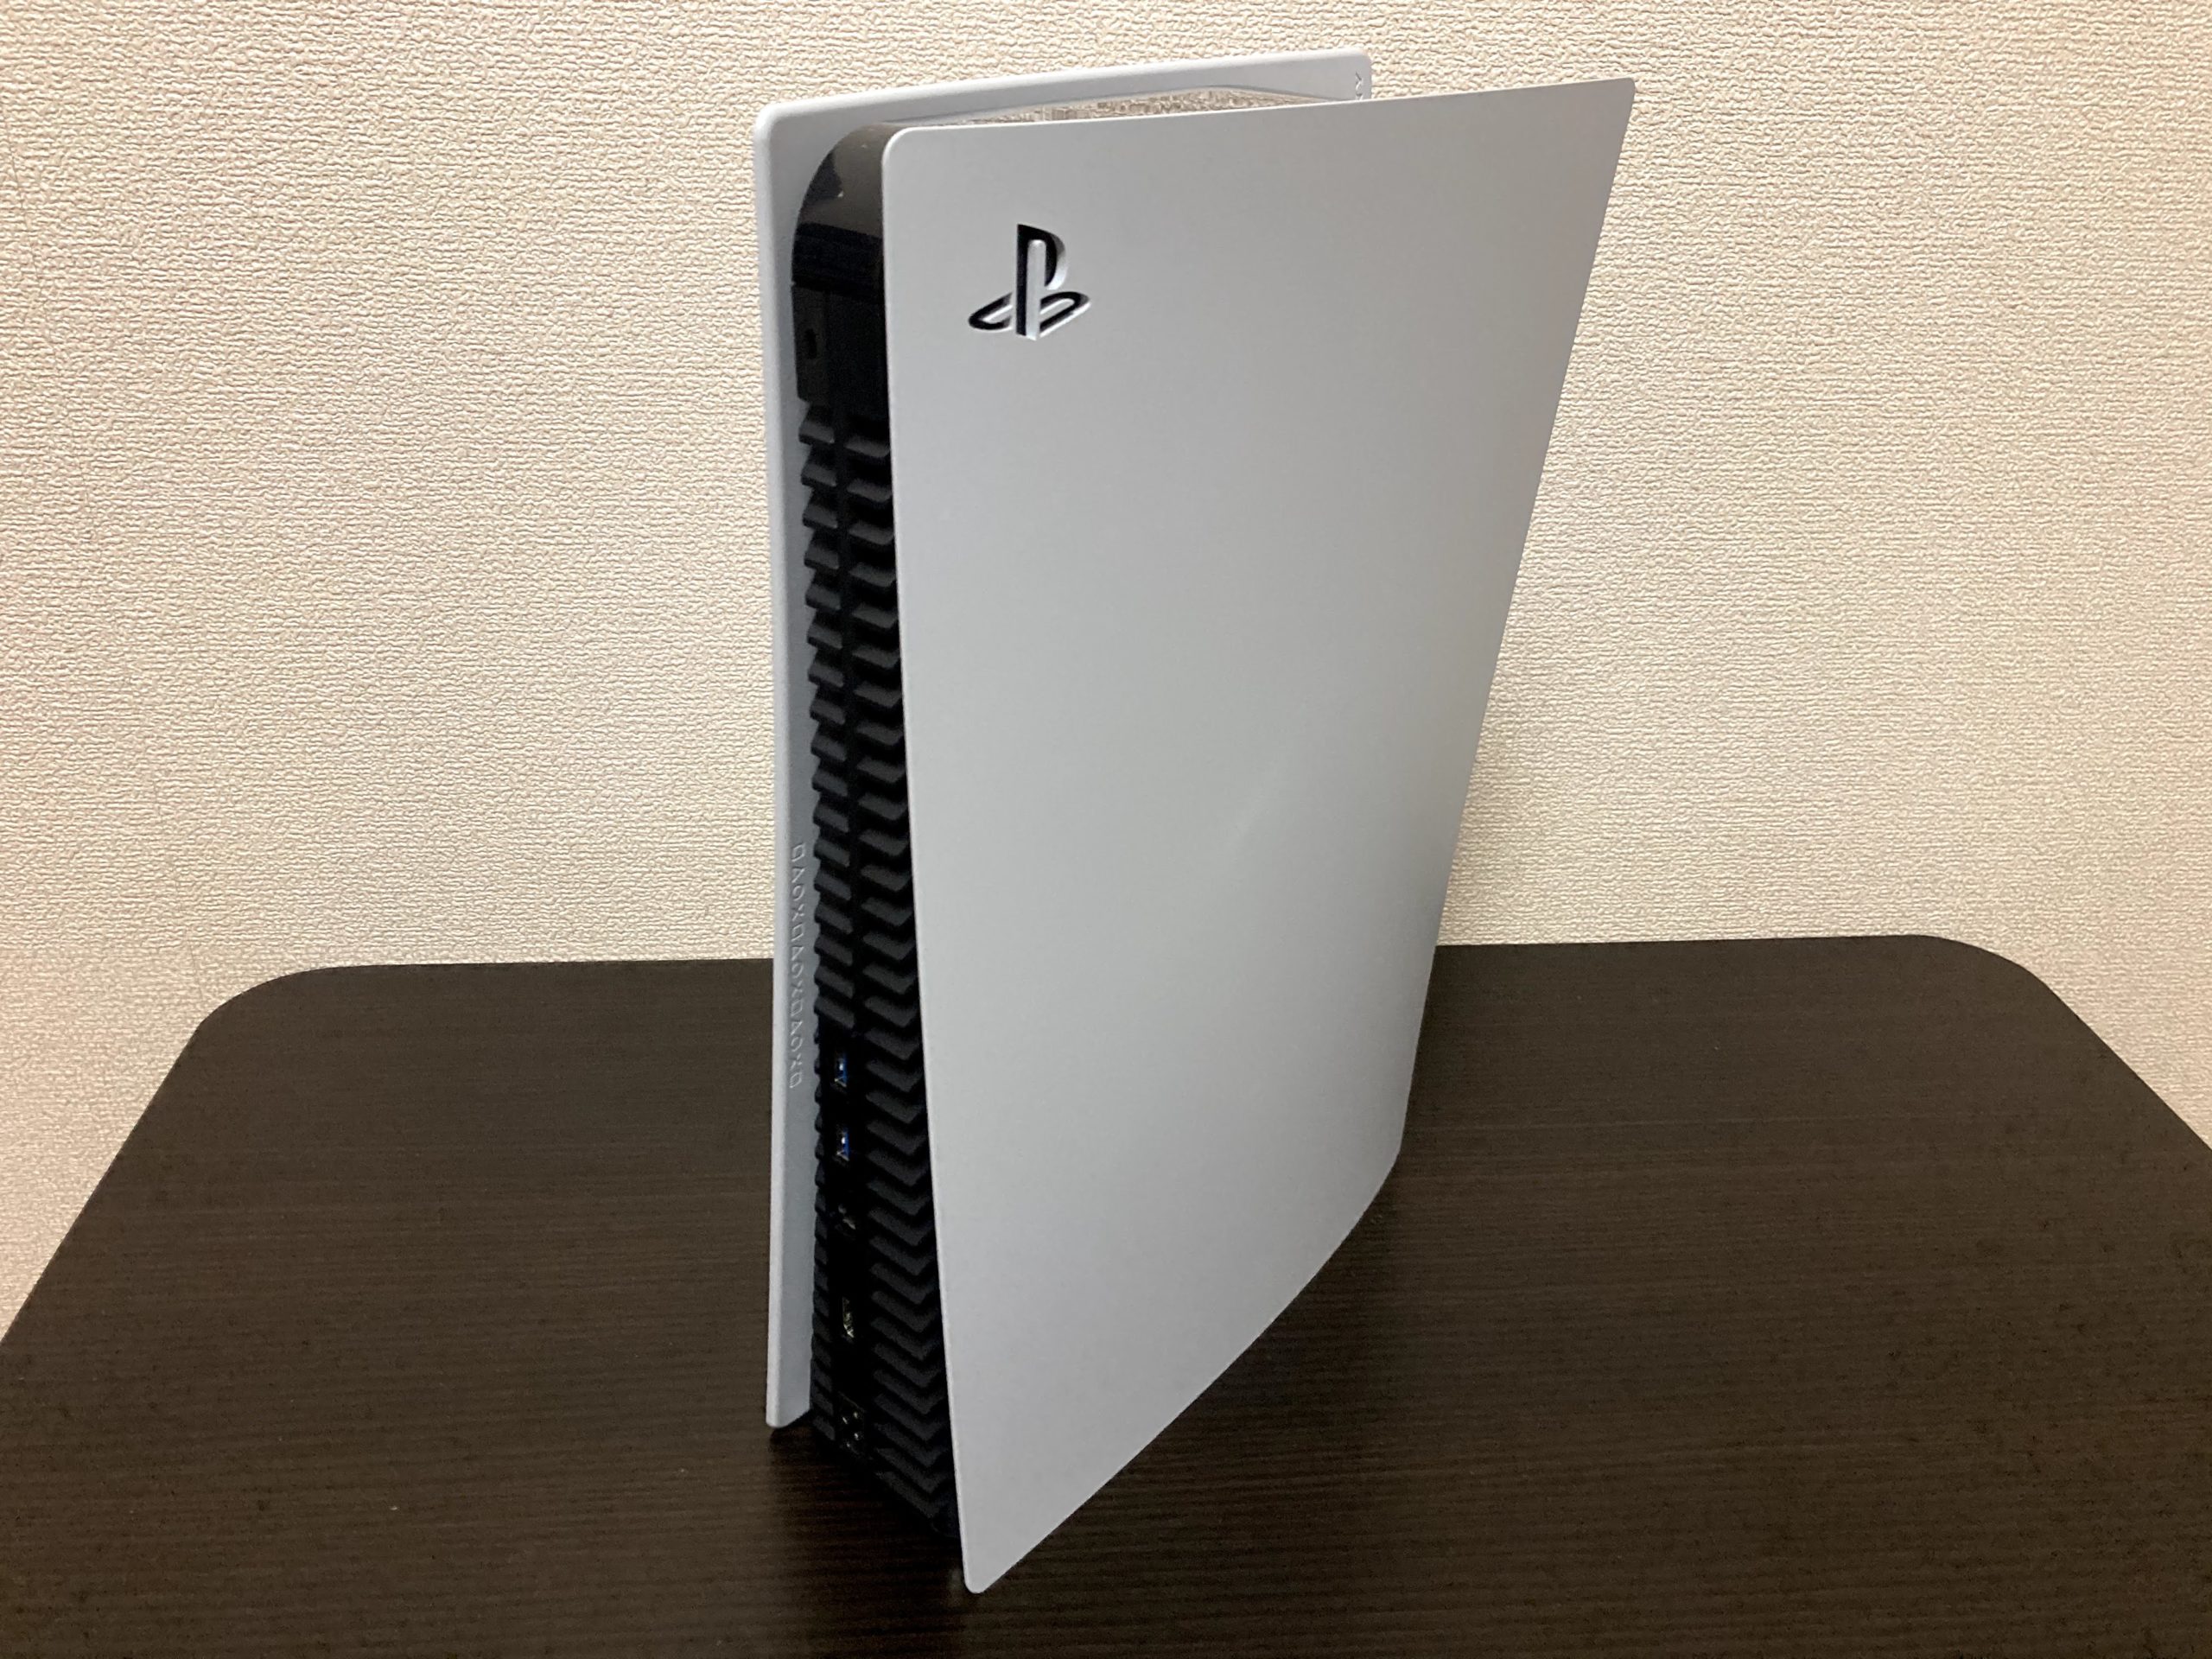 PS5 Back2